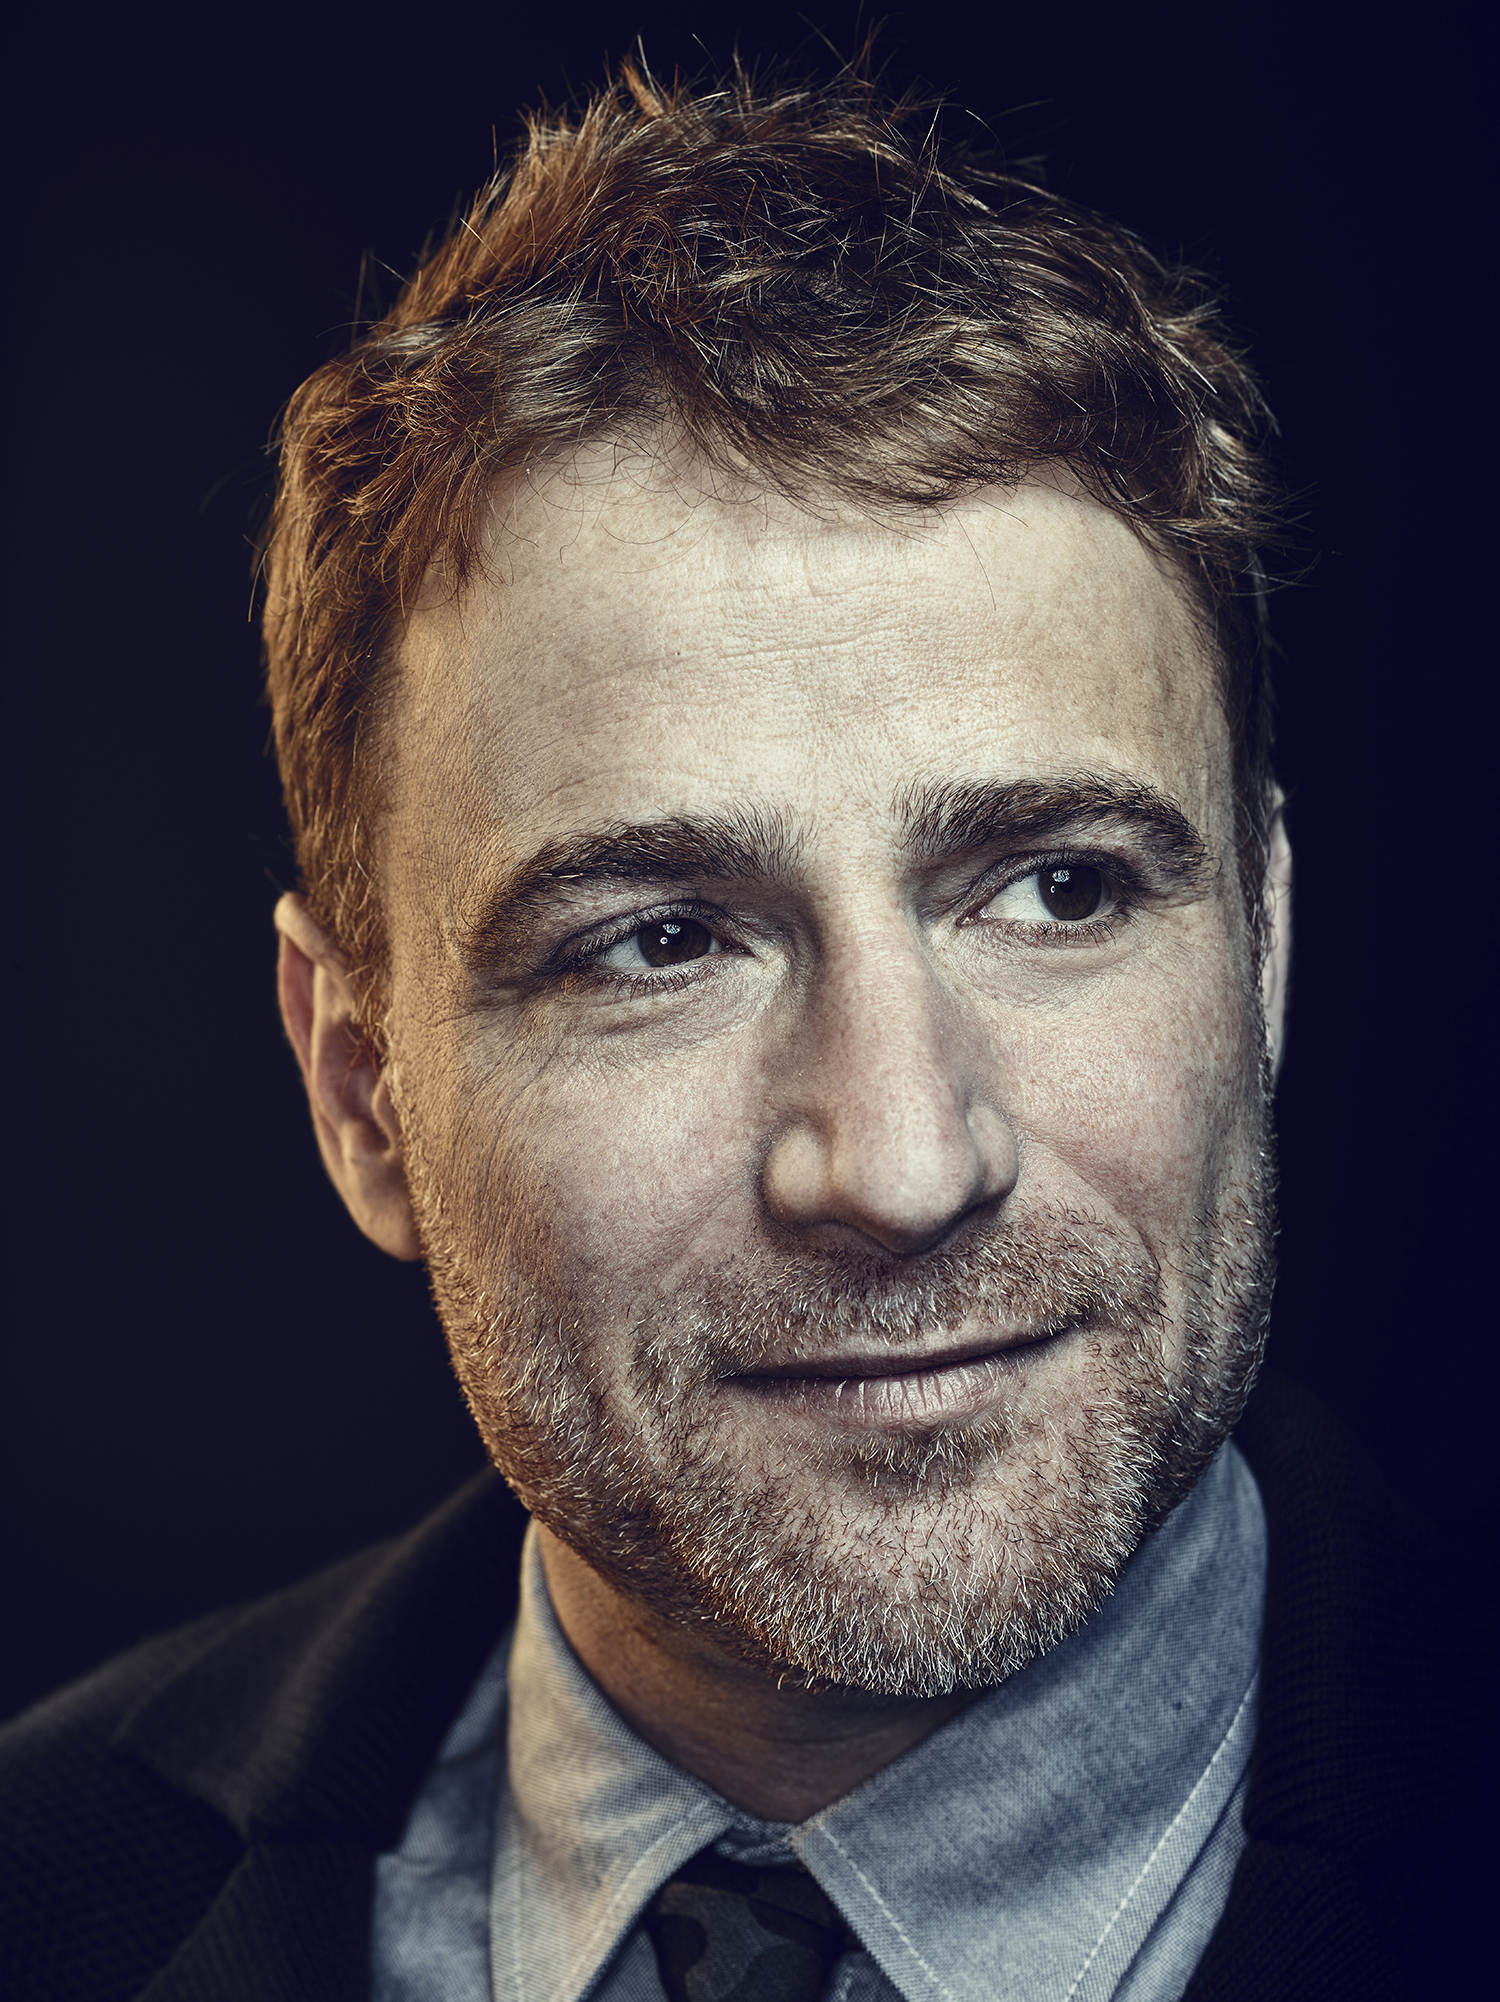 Stewart Butterfield, co-founder and chief executive office of Slack. (Ian Allen for TIME)